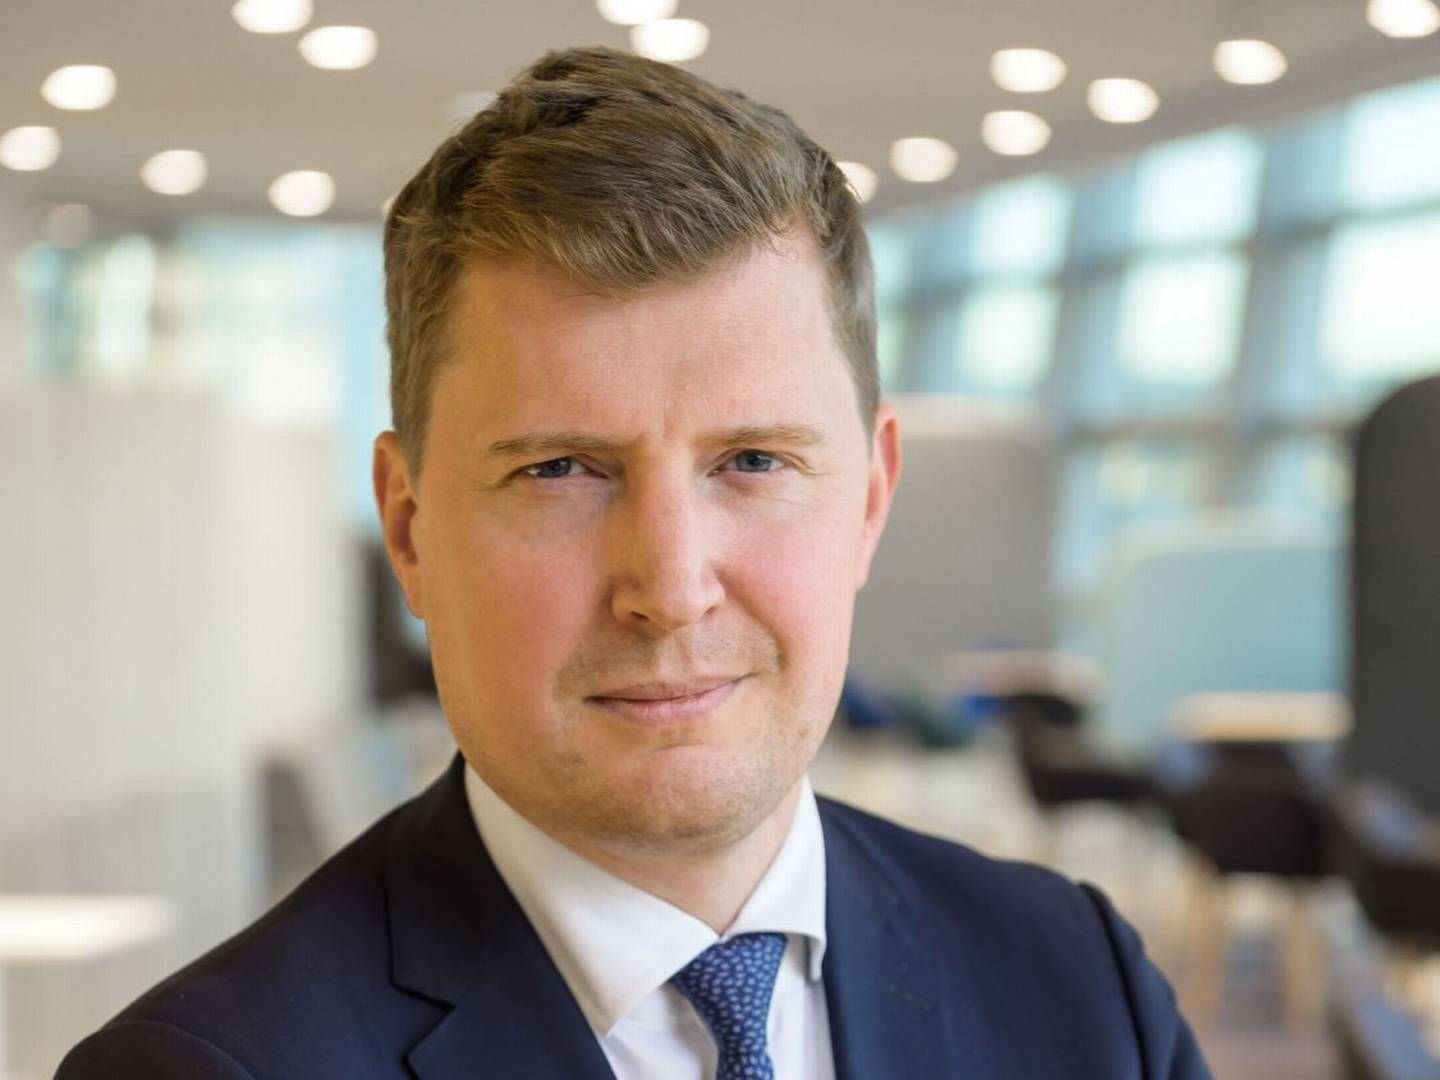 DFDS has appointed French national Mathieu Girardin as new Head of Ferry Division.